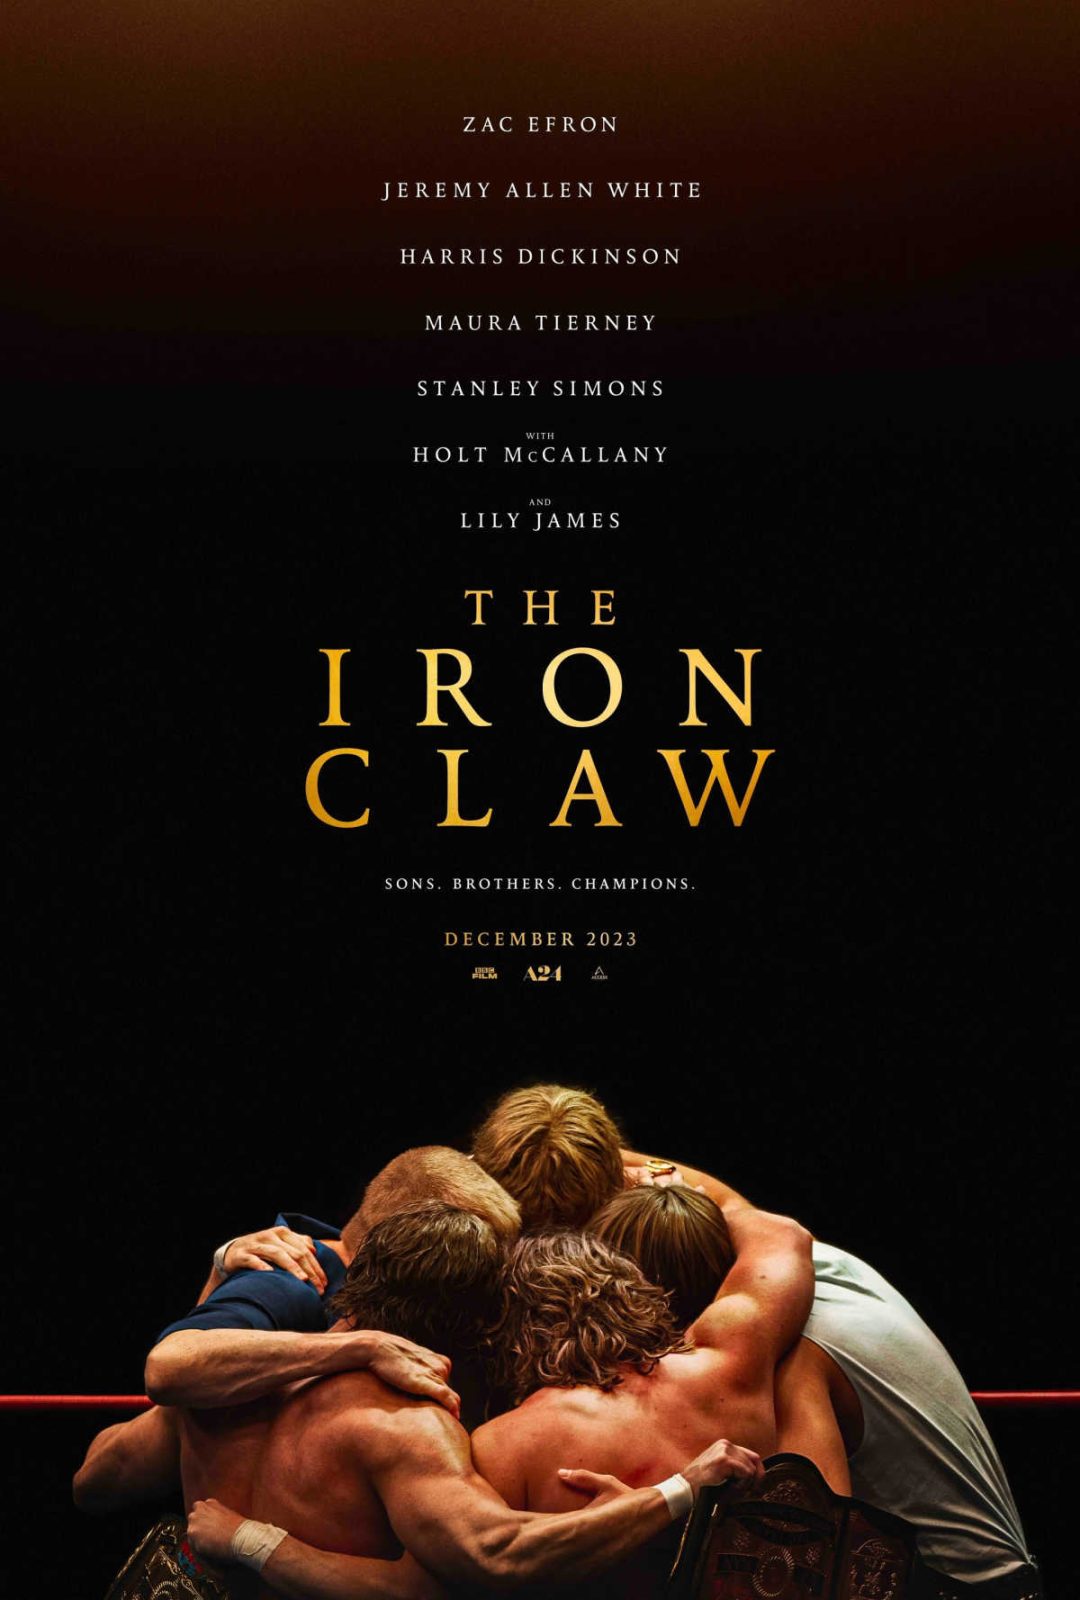 Brace for impact, wrestling fans and drama enthusiasts alike, because The Iron Claw arrives in theaters on December 22nd. This biographical masterpiece tells the story of the legendary Von Erich brothers, a wrestling dynasty fueled by ambition, tragedy, and an unbreakable bond.